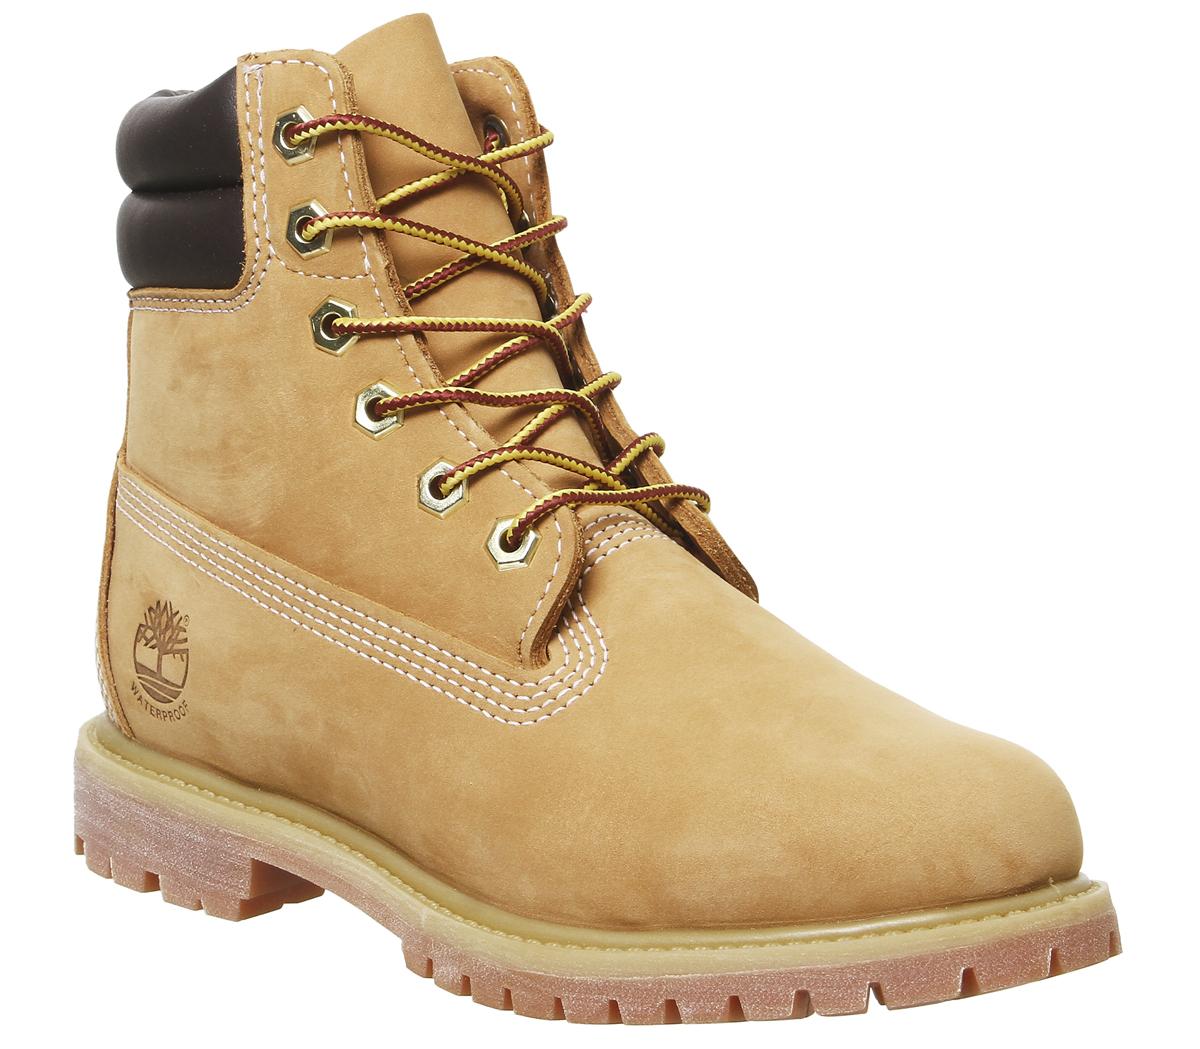 timberland waterville 6 inch boots wheat nubuck